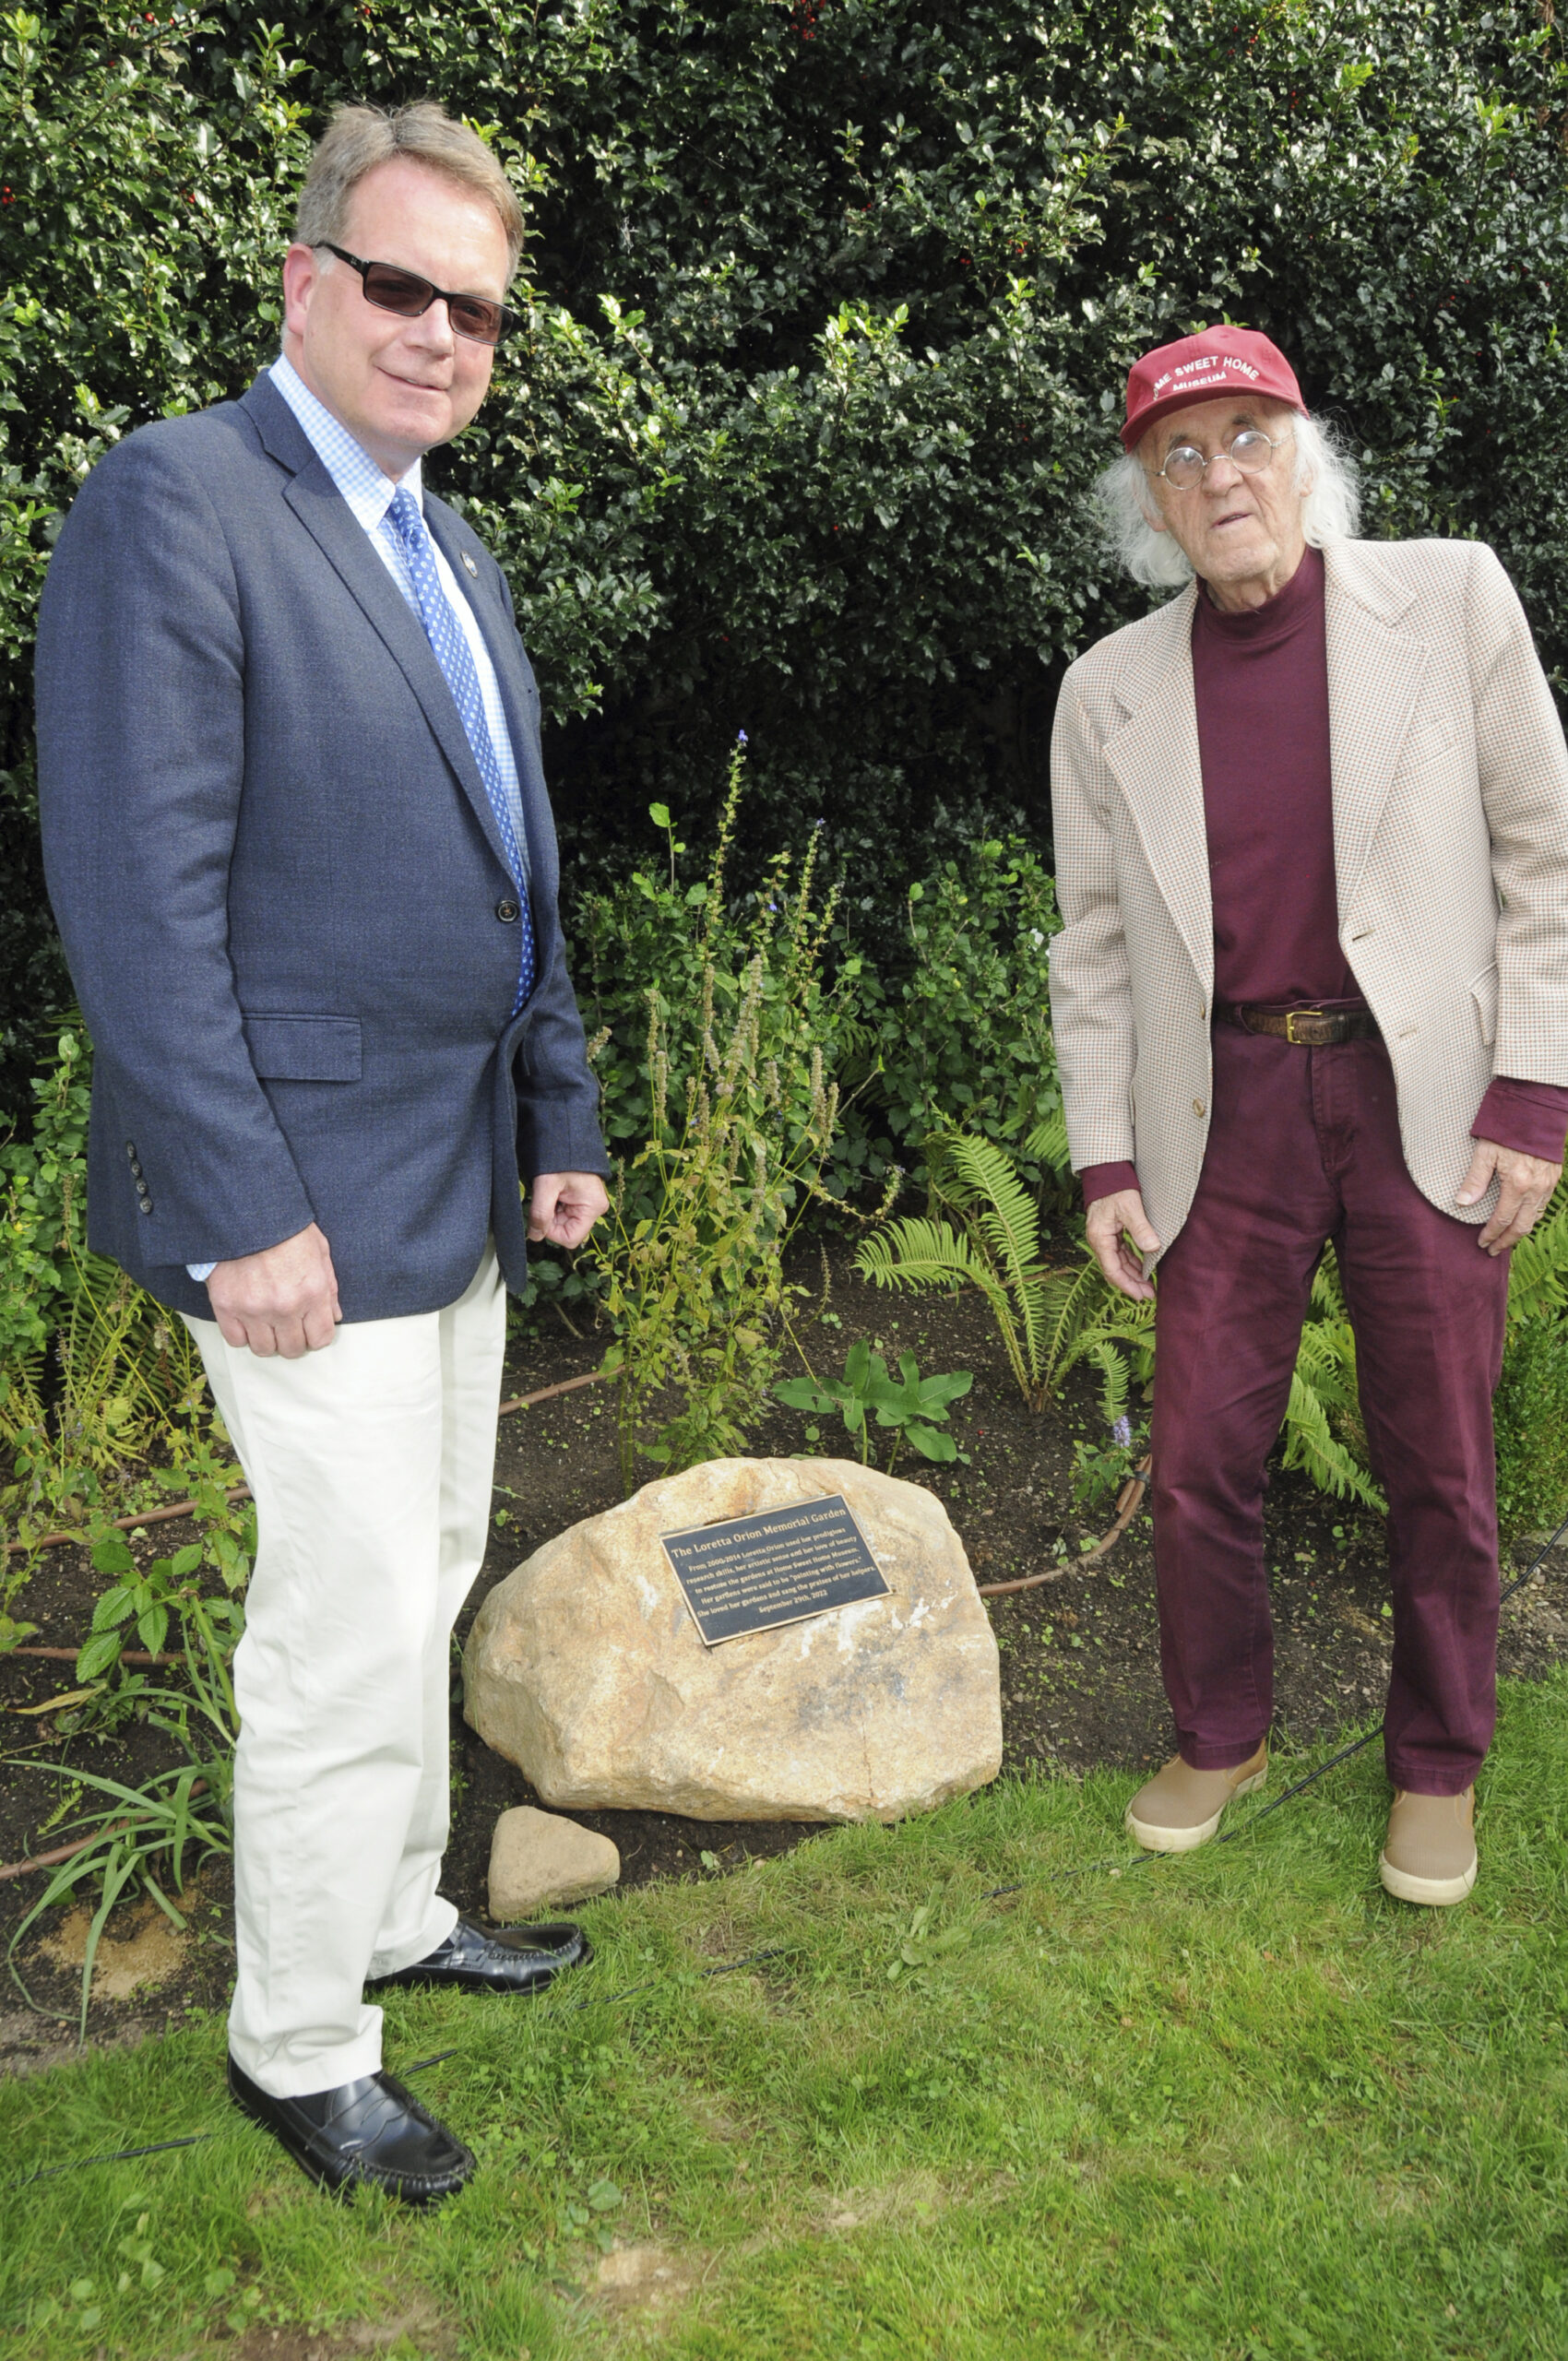 East Hampton Village Mayor Jerry Larsen and Hugh King at the dedication of the Loretta Orion Memorial Garden at the Home Sweet Home Museum in East Hampton on September 29. According to the inscription on the memorial plaque, the late Loretta Orion 